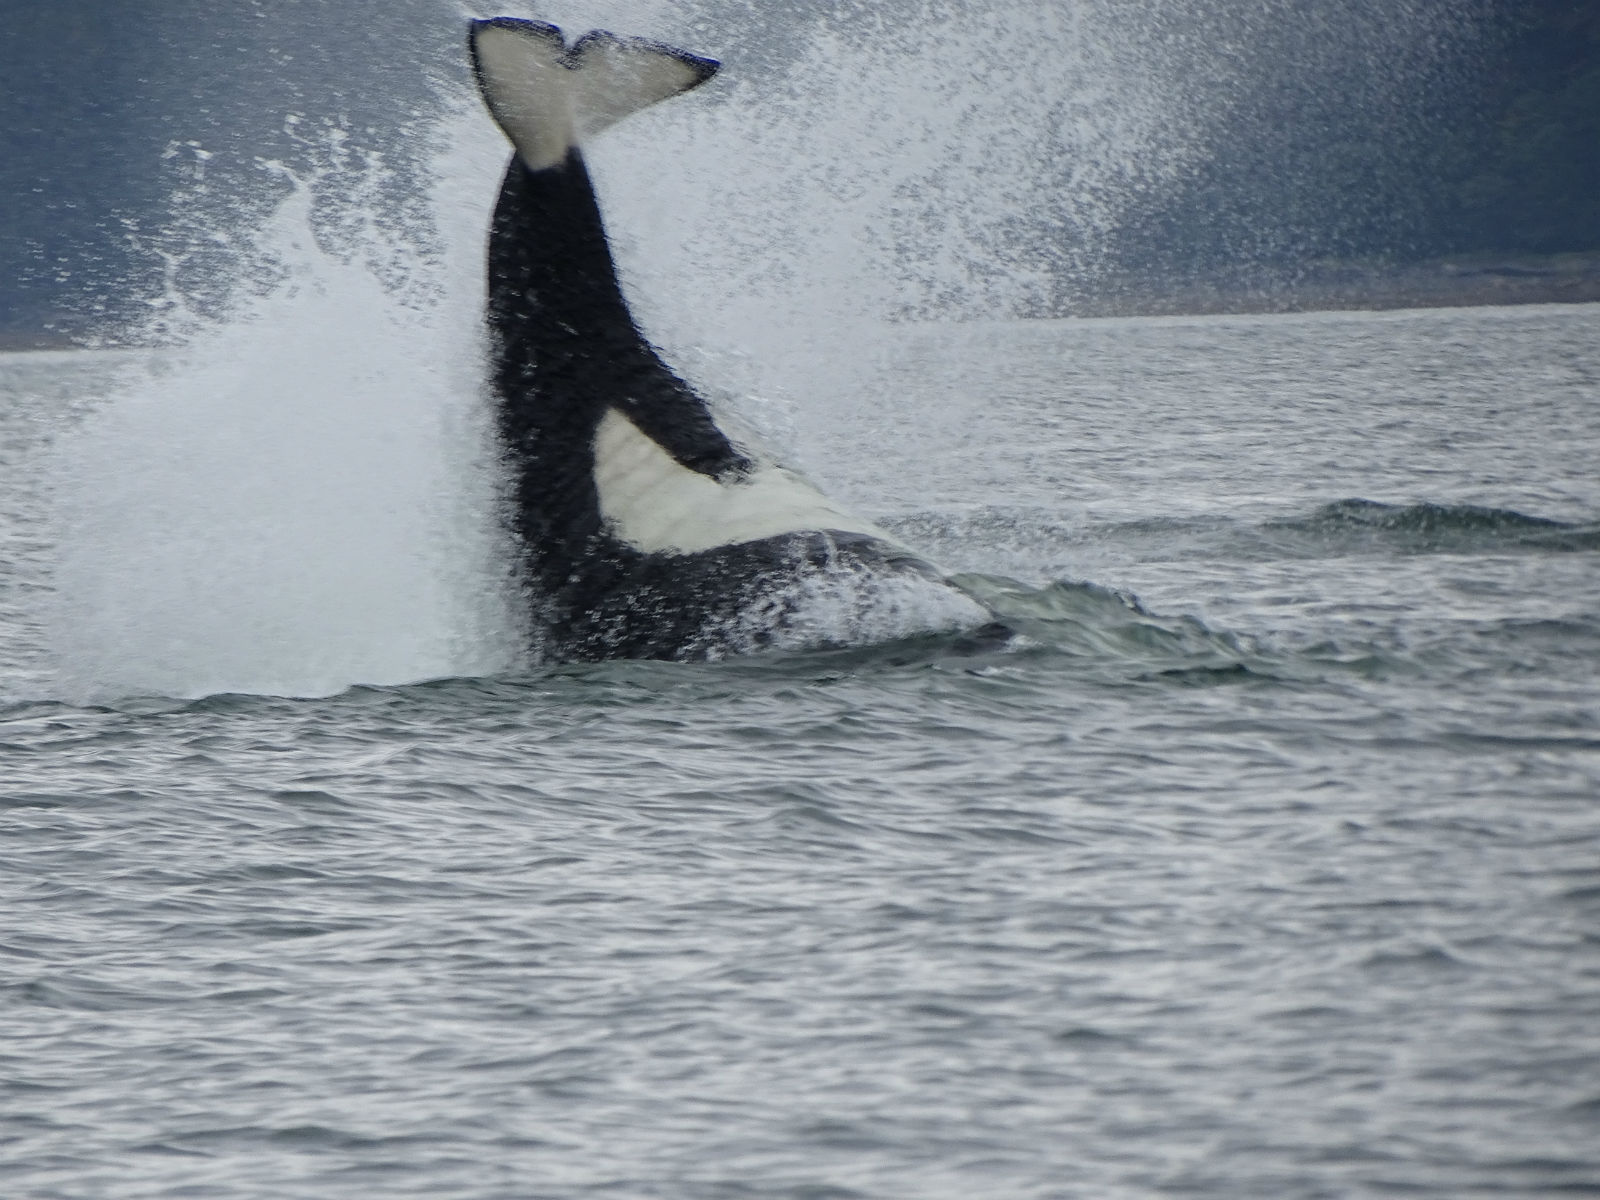 Orca Free in the Wild